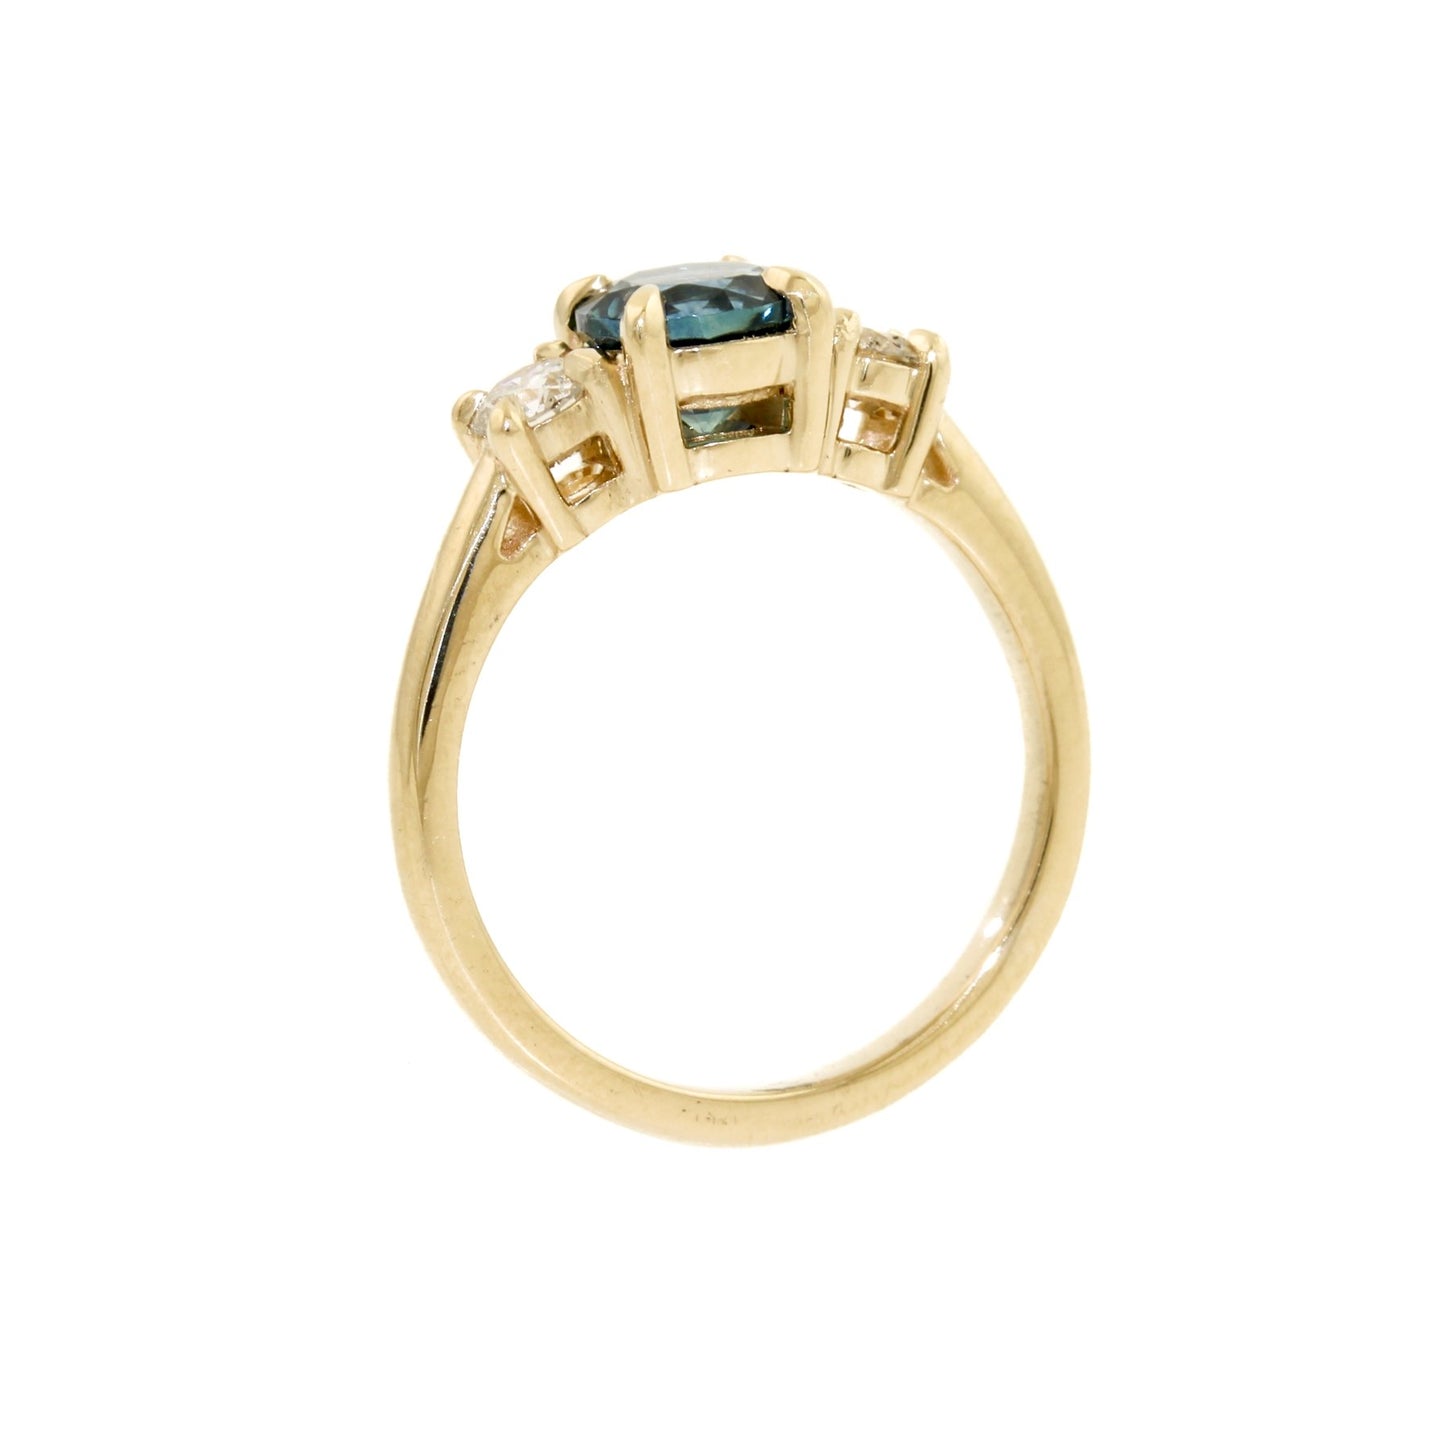 This exquisite ring features a mesmerizing dark blue Montana sapphire, carefully cut and polished to bring out the best of its natural radiance and captivating colour. The sapphire is perfectly complemented by the sparkling diamonds set in the 14k gold band, creating an unforgettable display of brilliance and elegance.